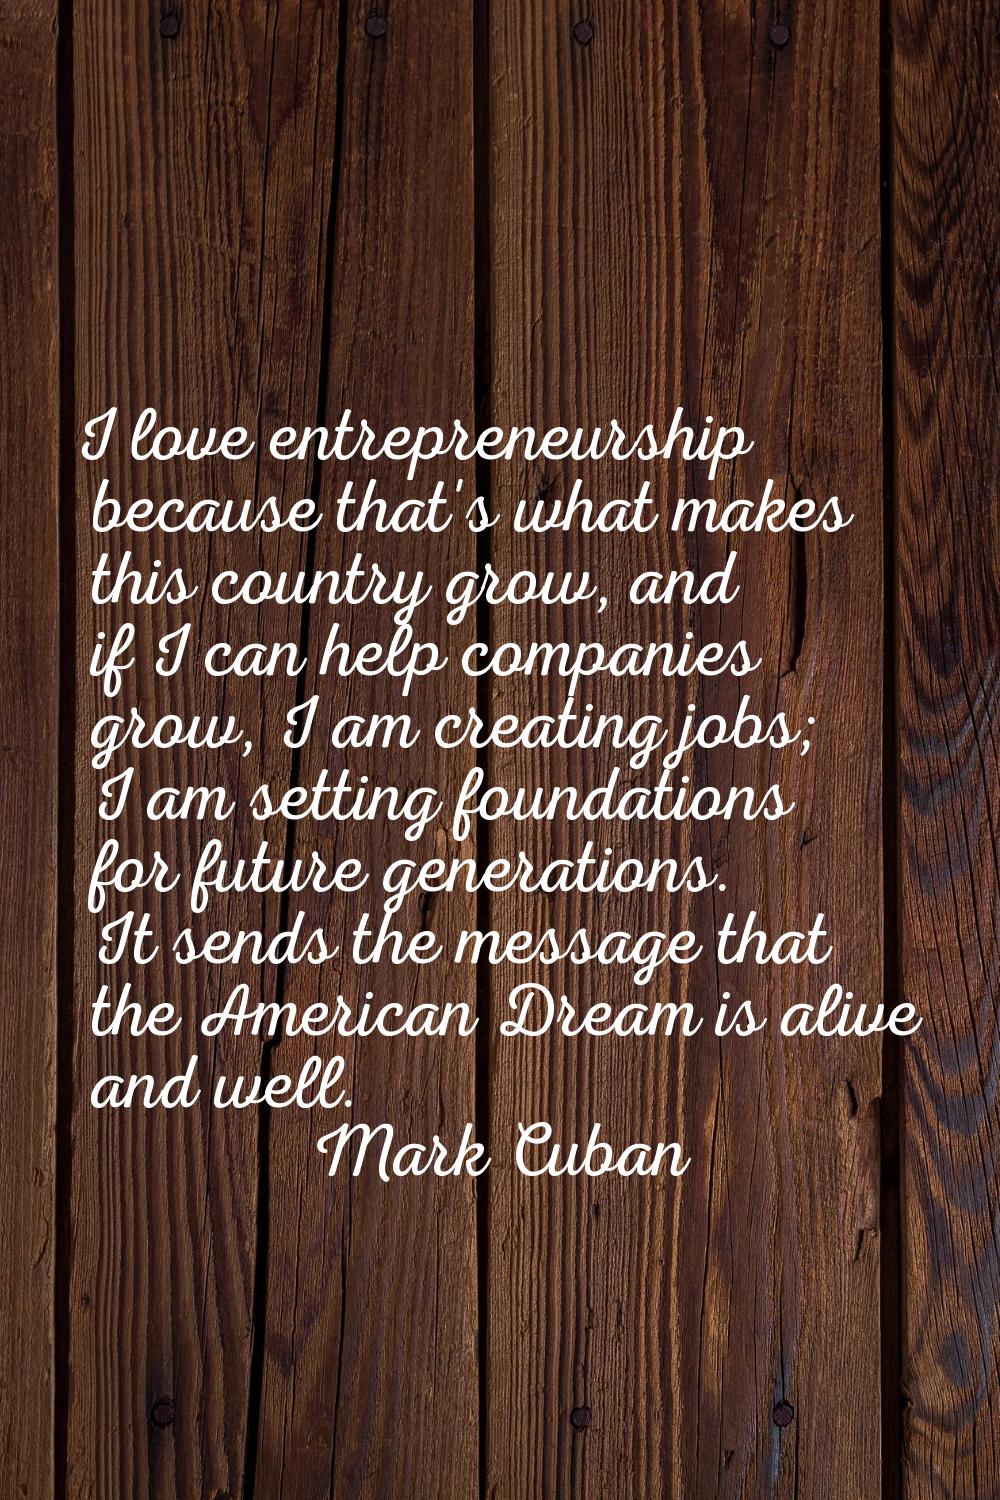 I love entrepreneurship because that's what makes this country grow, and if I can help companies gr